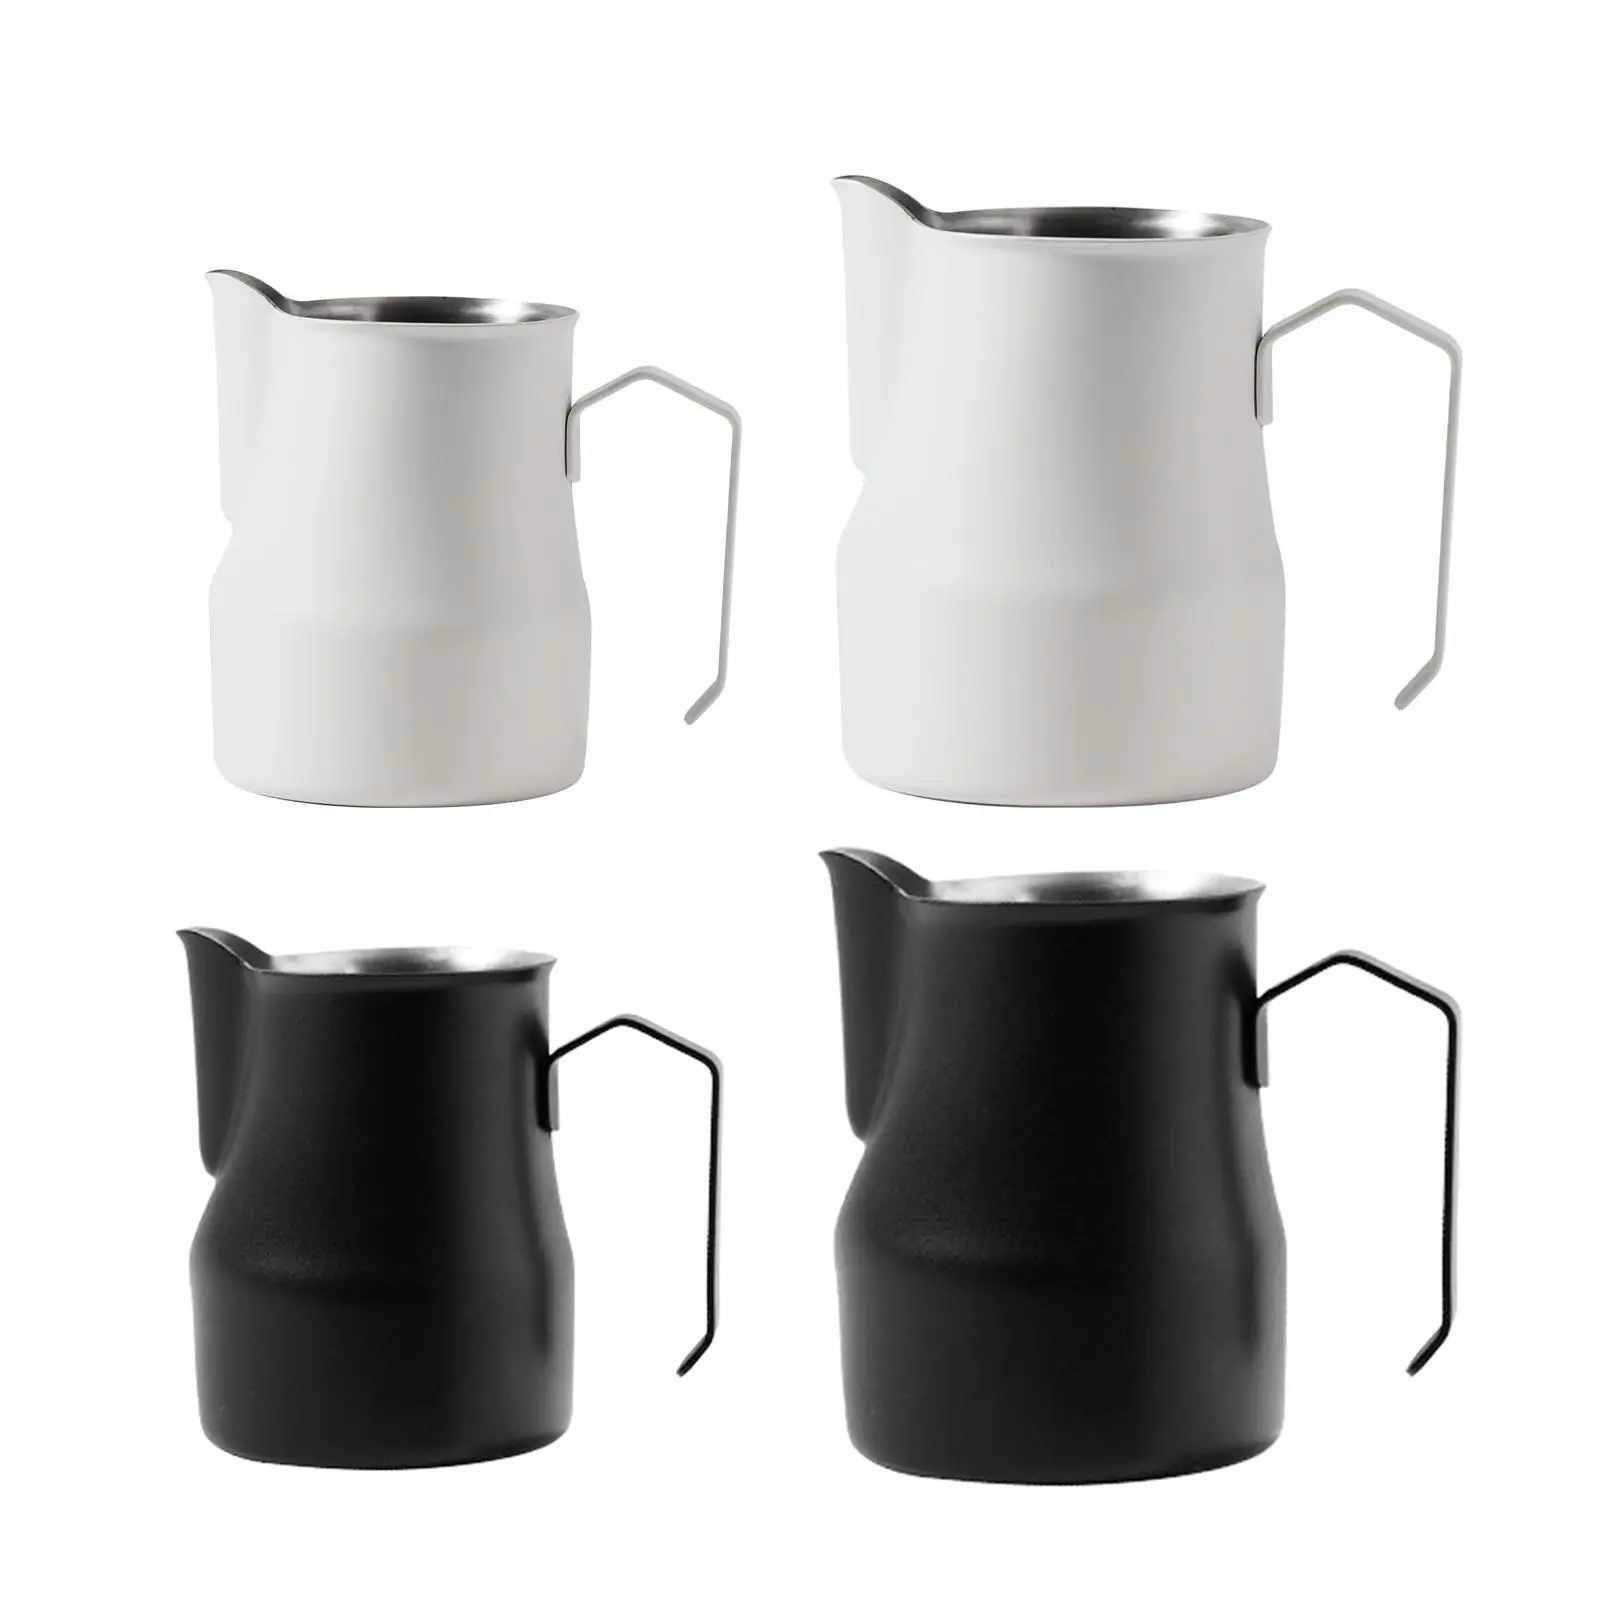 Coffee Milk Frothing Jug with Scale Handle milk Frothing Pitcher for DIY hot Chocolate Shop Kitchen